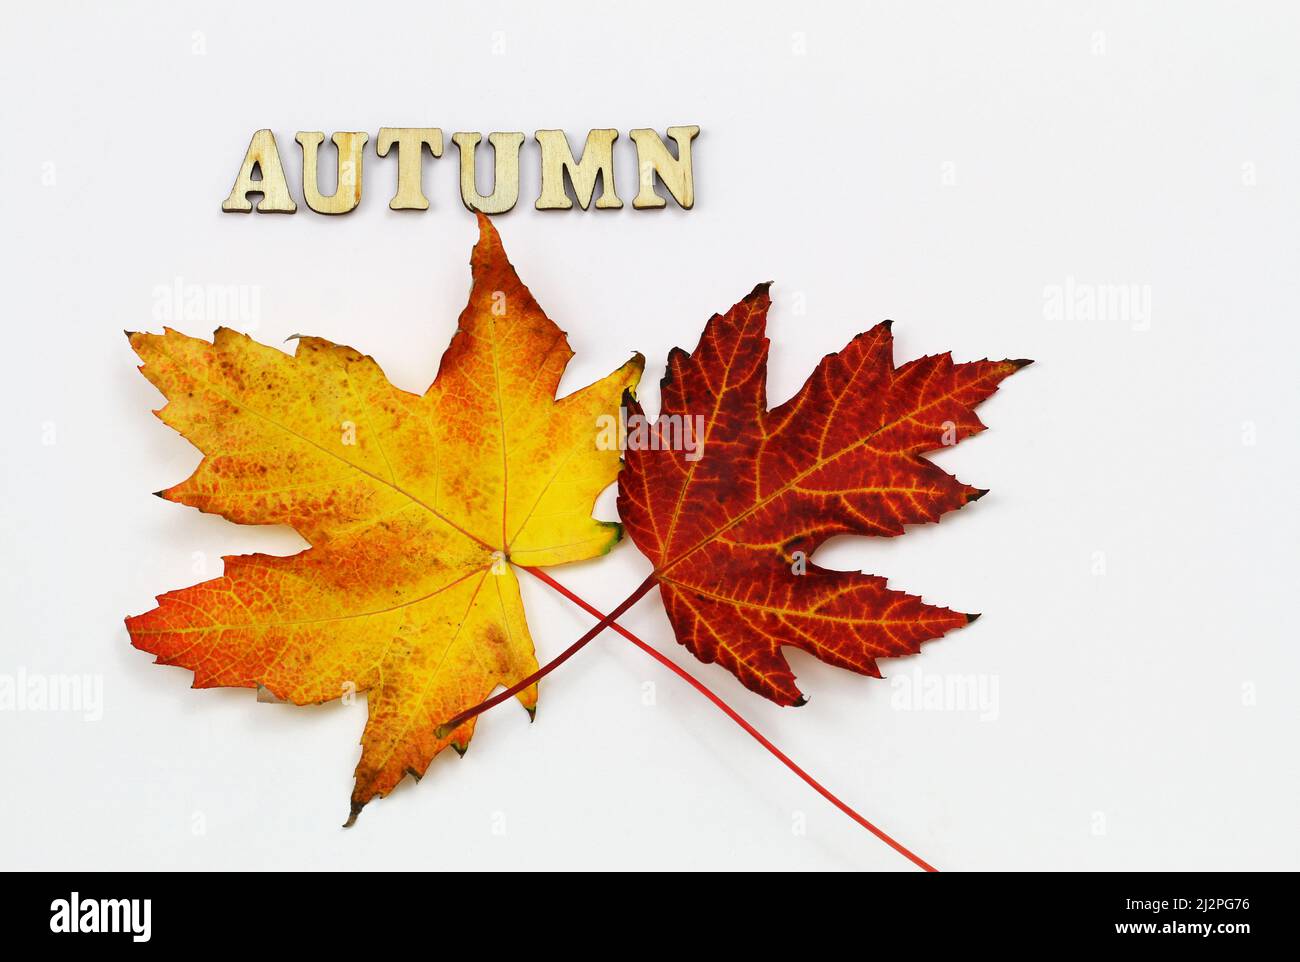 Word autumn written with wooden letters and two colorful autumn maple leaves on white background Stock Photo